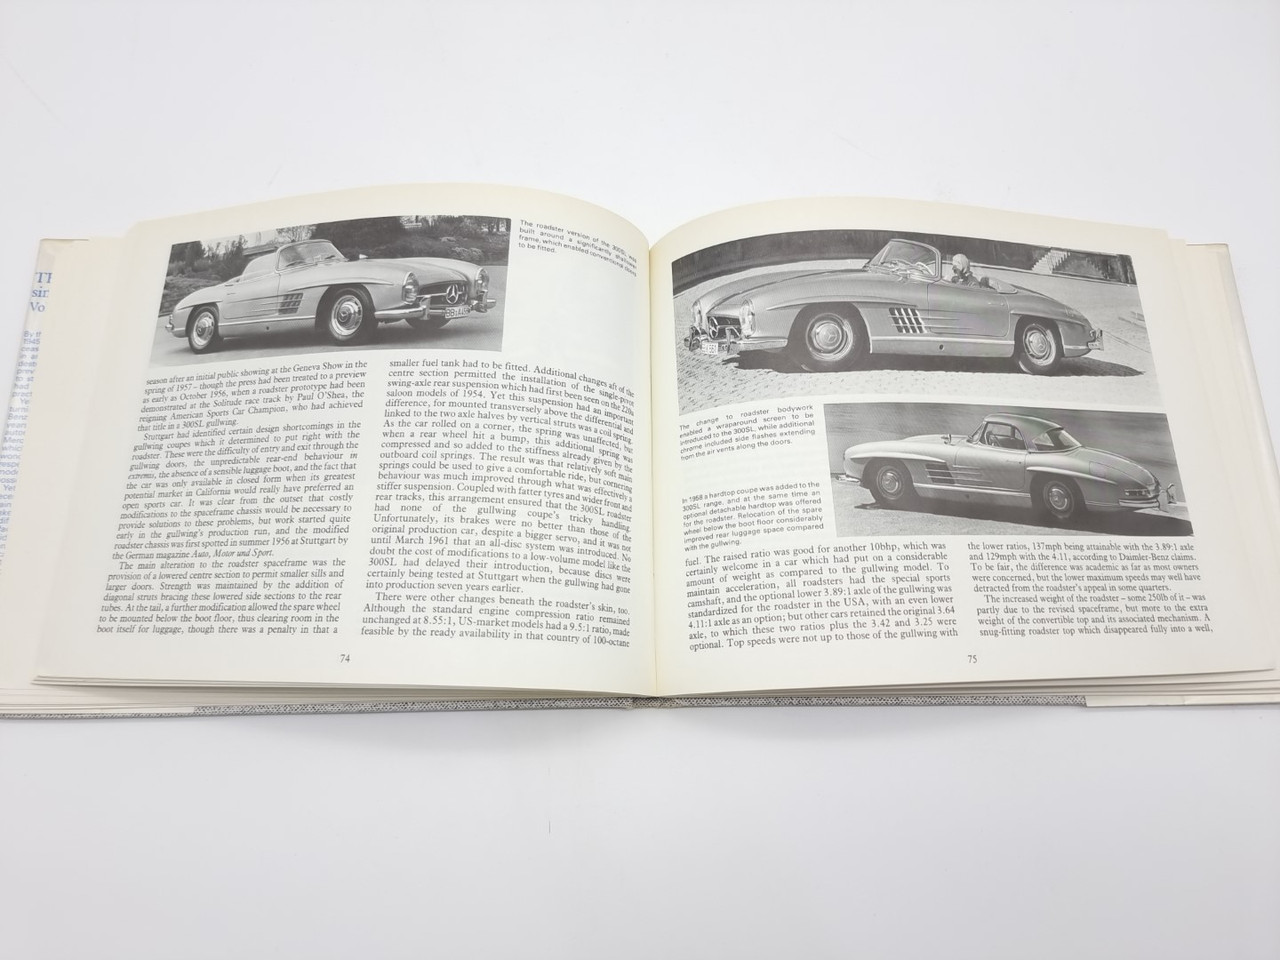 Mercedes-Benz since 1945 Vol. The 1940s and 1950s Collector's Guide  (William Taylor, 1985)